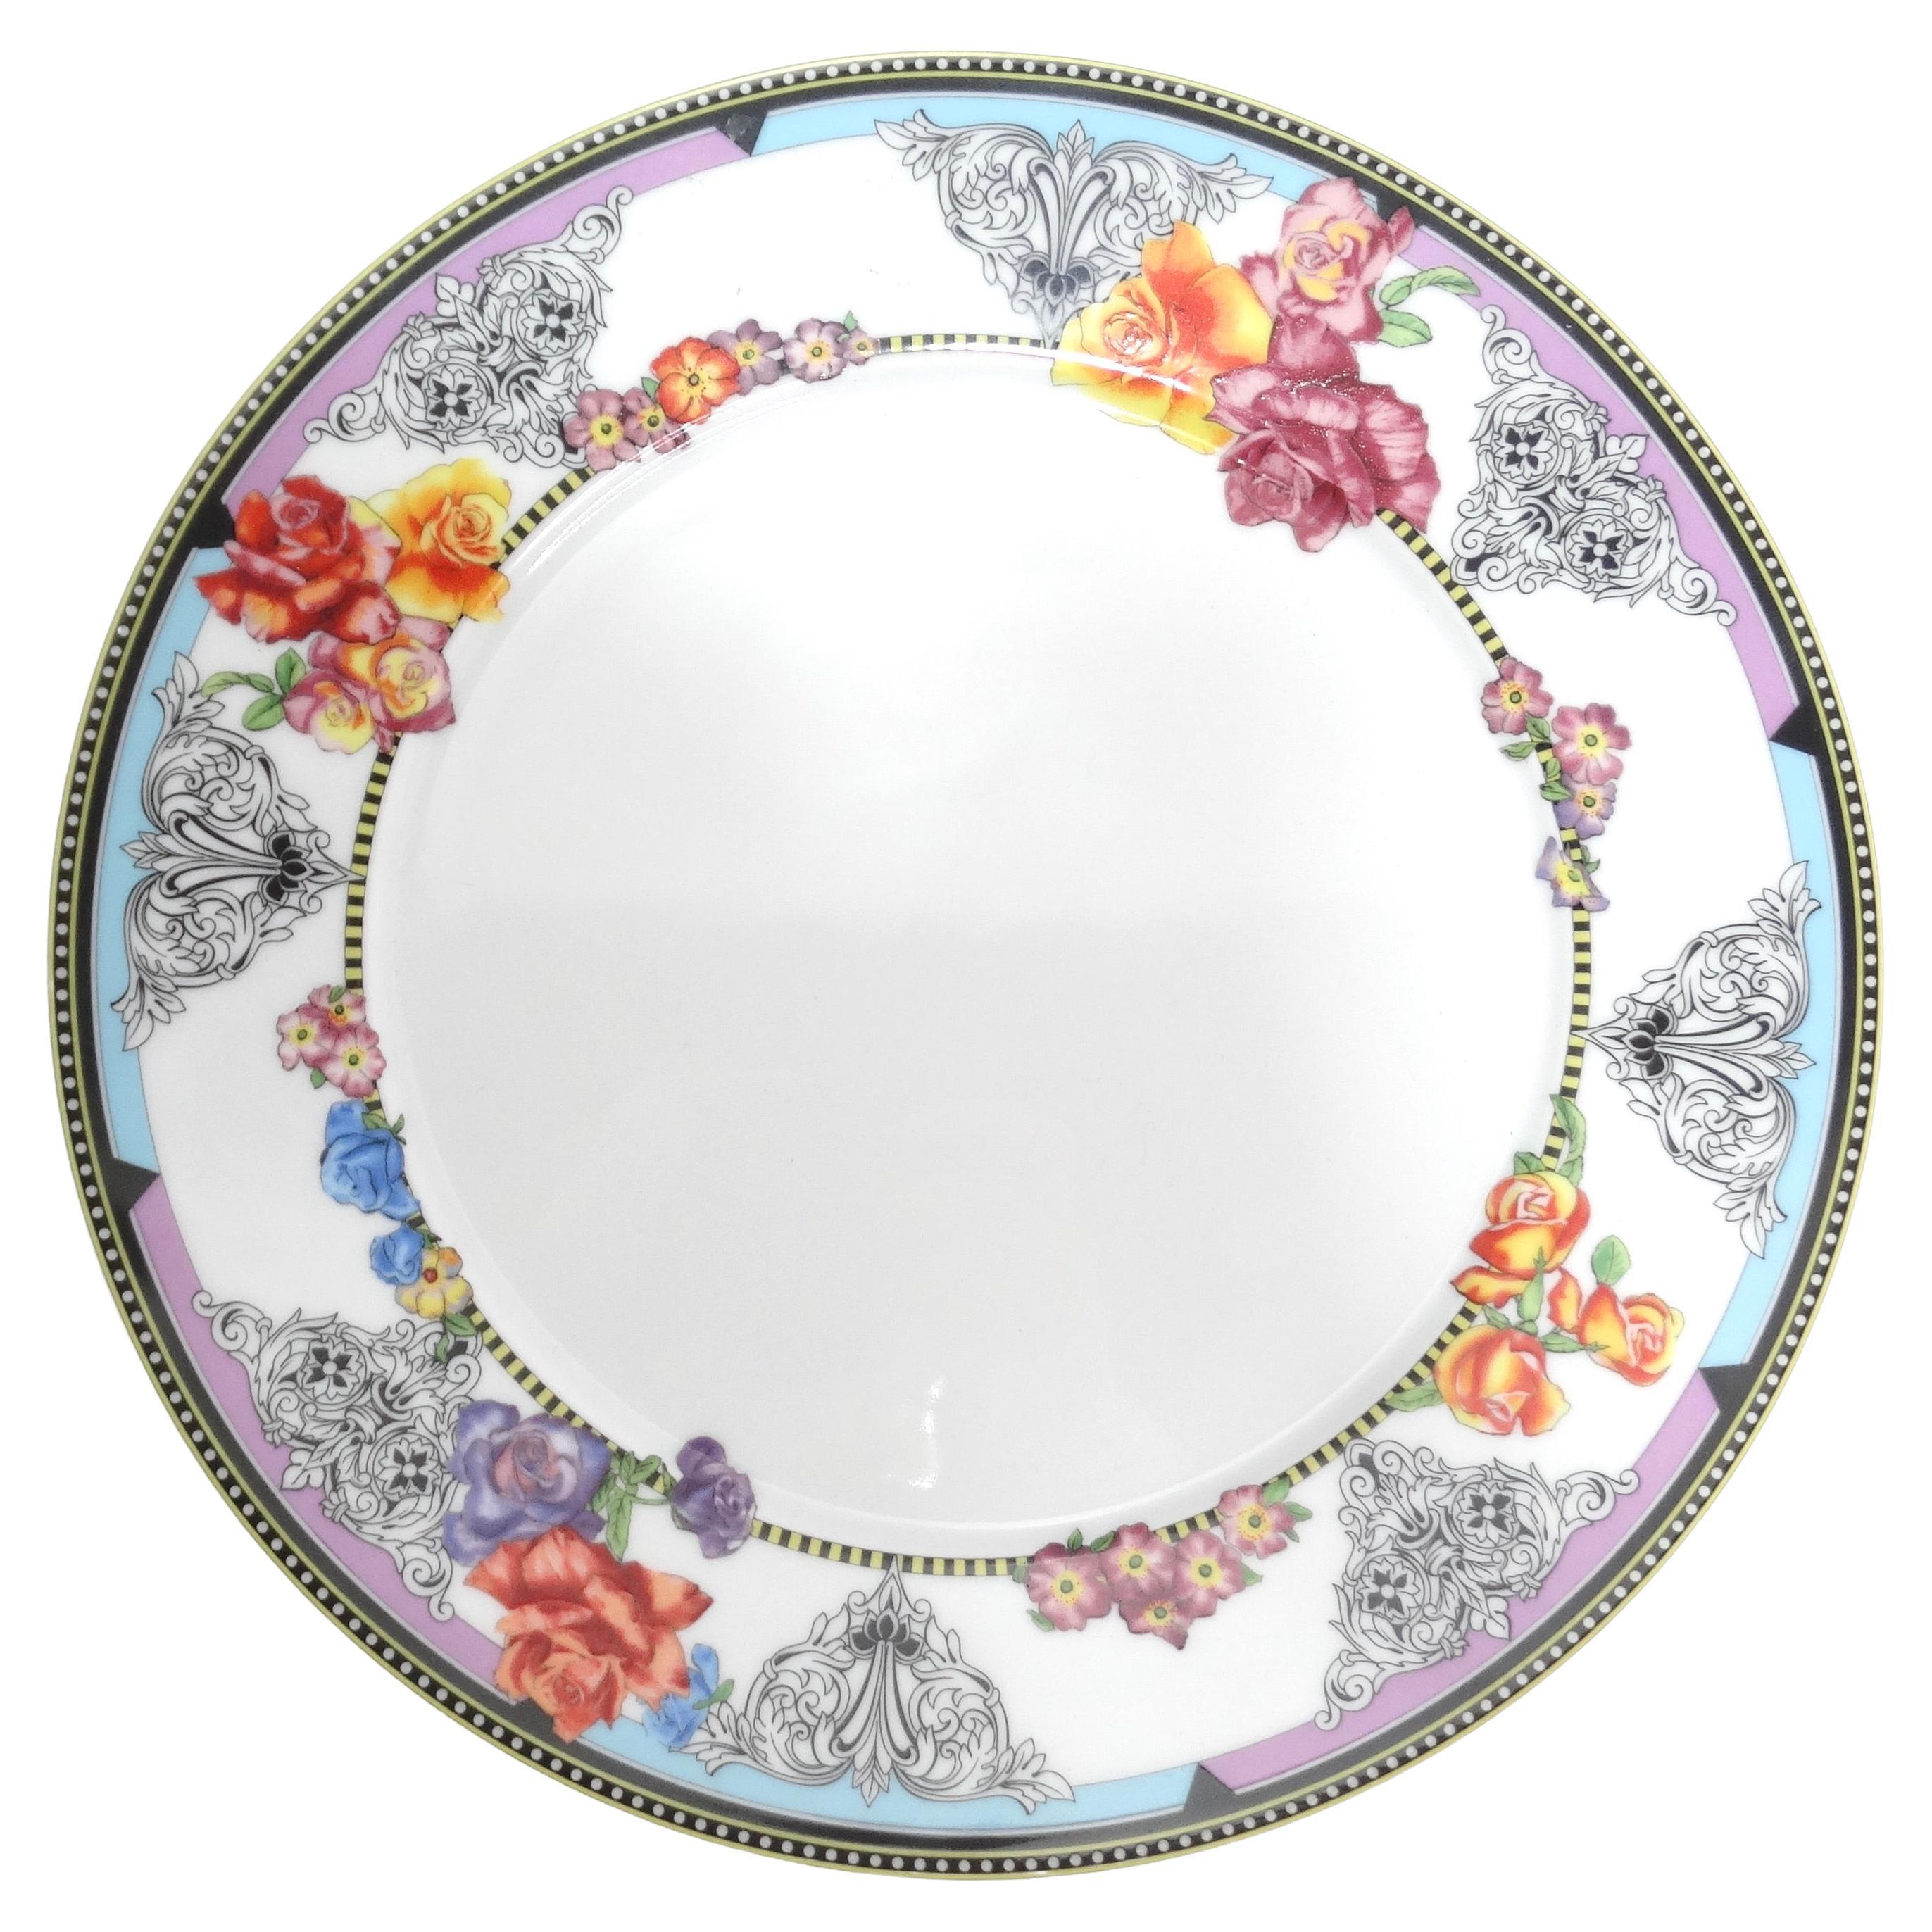 Introducing the Versace Rosenthal 1990s Porcelain Hot Flowers Salad Plate, a stunning and luxurious addition to your tableware collection. This porcelain salad/dessert plate features a whimsical print adorned with detailed multicolor roses, black